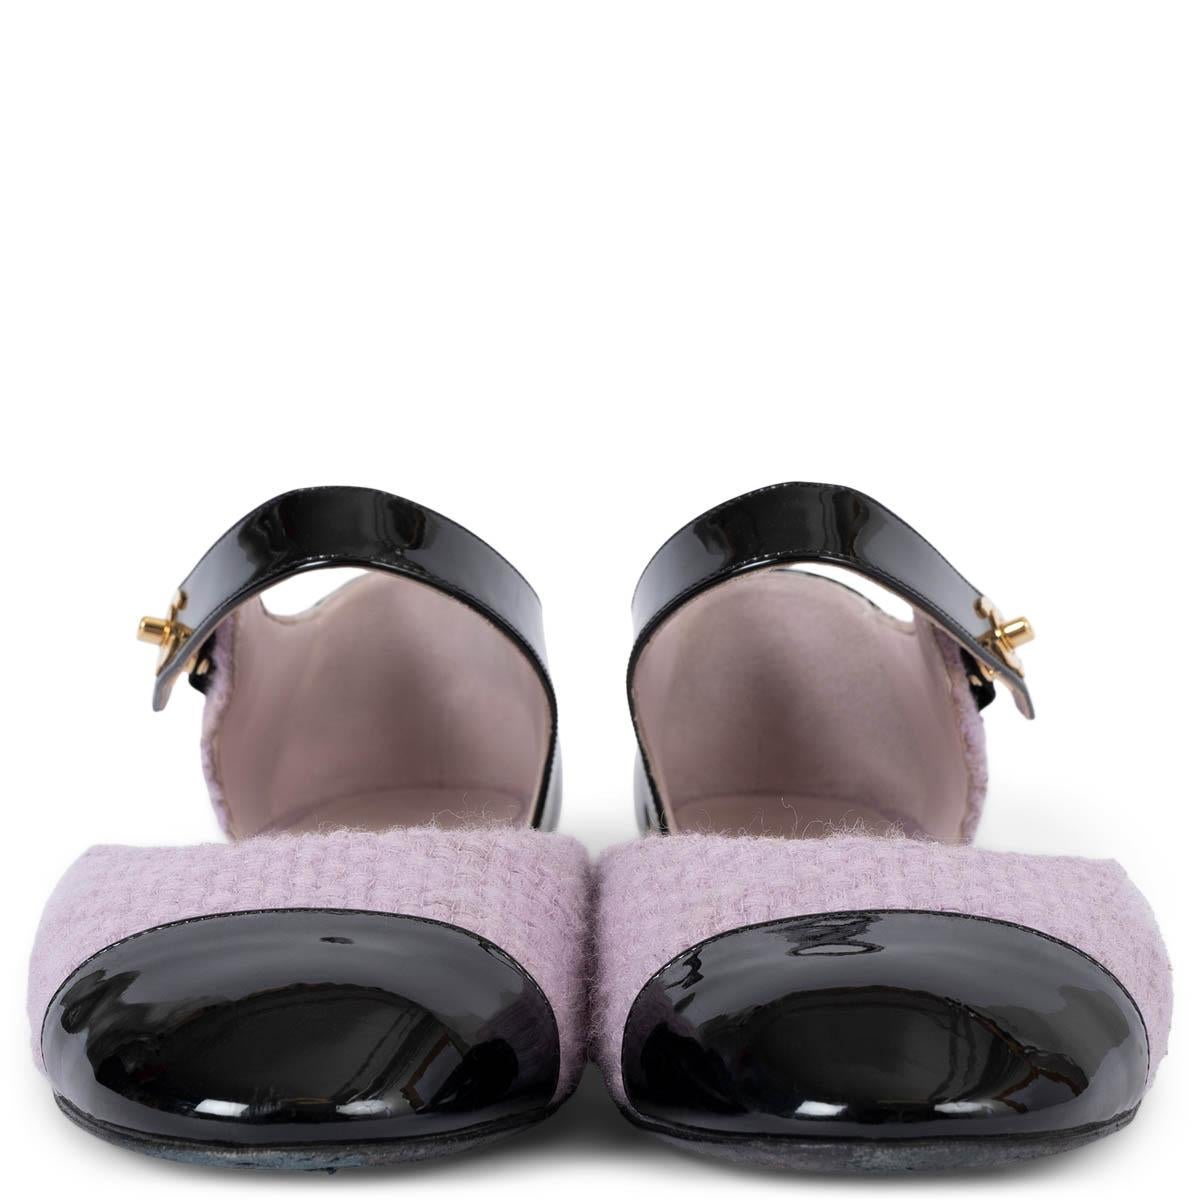 100% authentic Chanel Mary-Jane flats in lilac tweed with black patent leather cap toe, heel and strap. The design features a gold-tone CC turn-lock closure and golden heel. Have been worn and are in excellent condition. Come with dust bag. 

2021